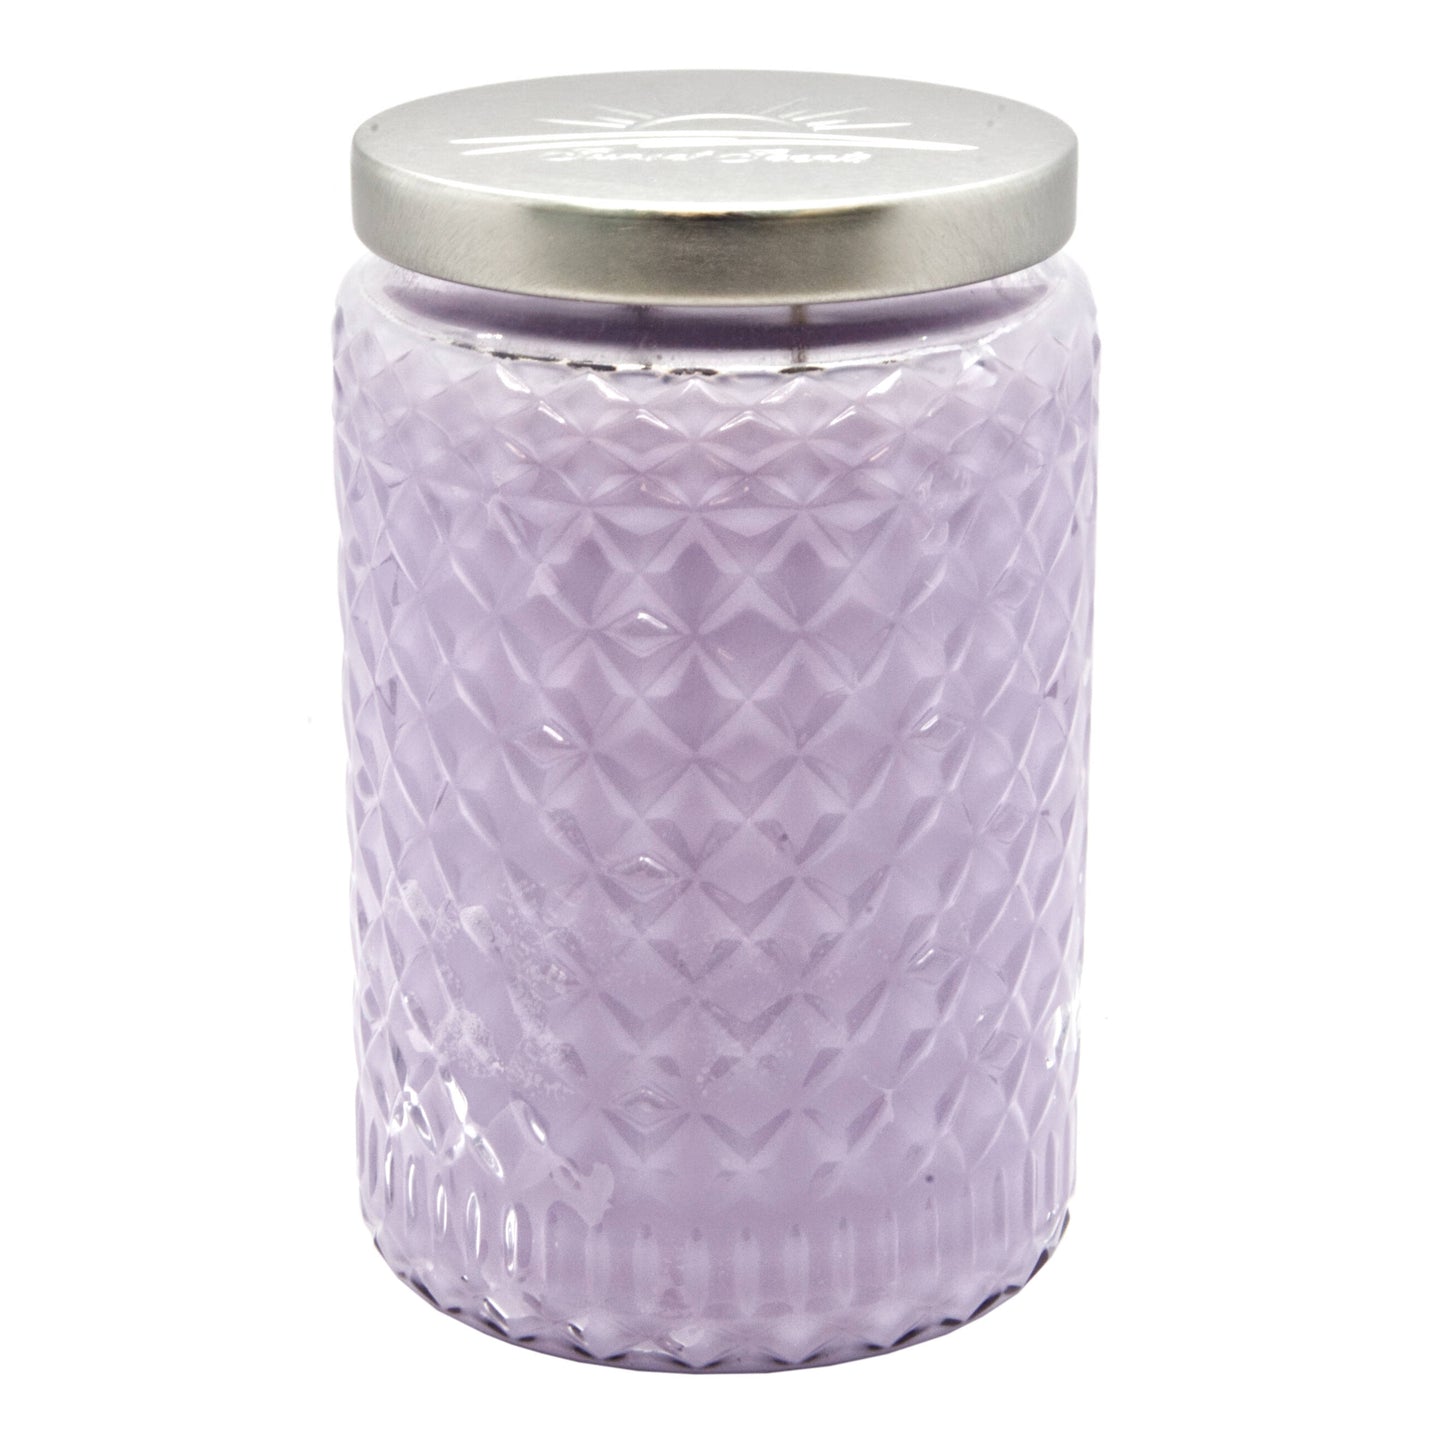 Lavender Chamomile Scented Candle